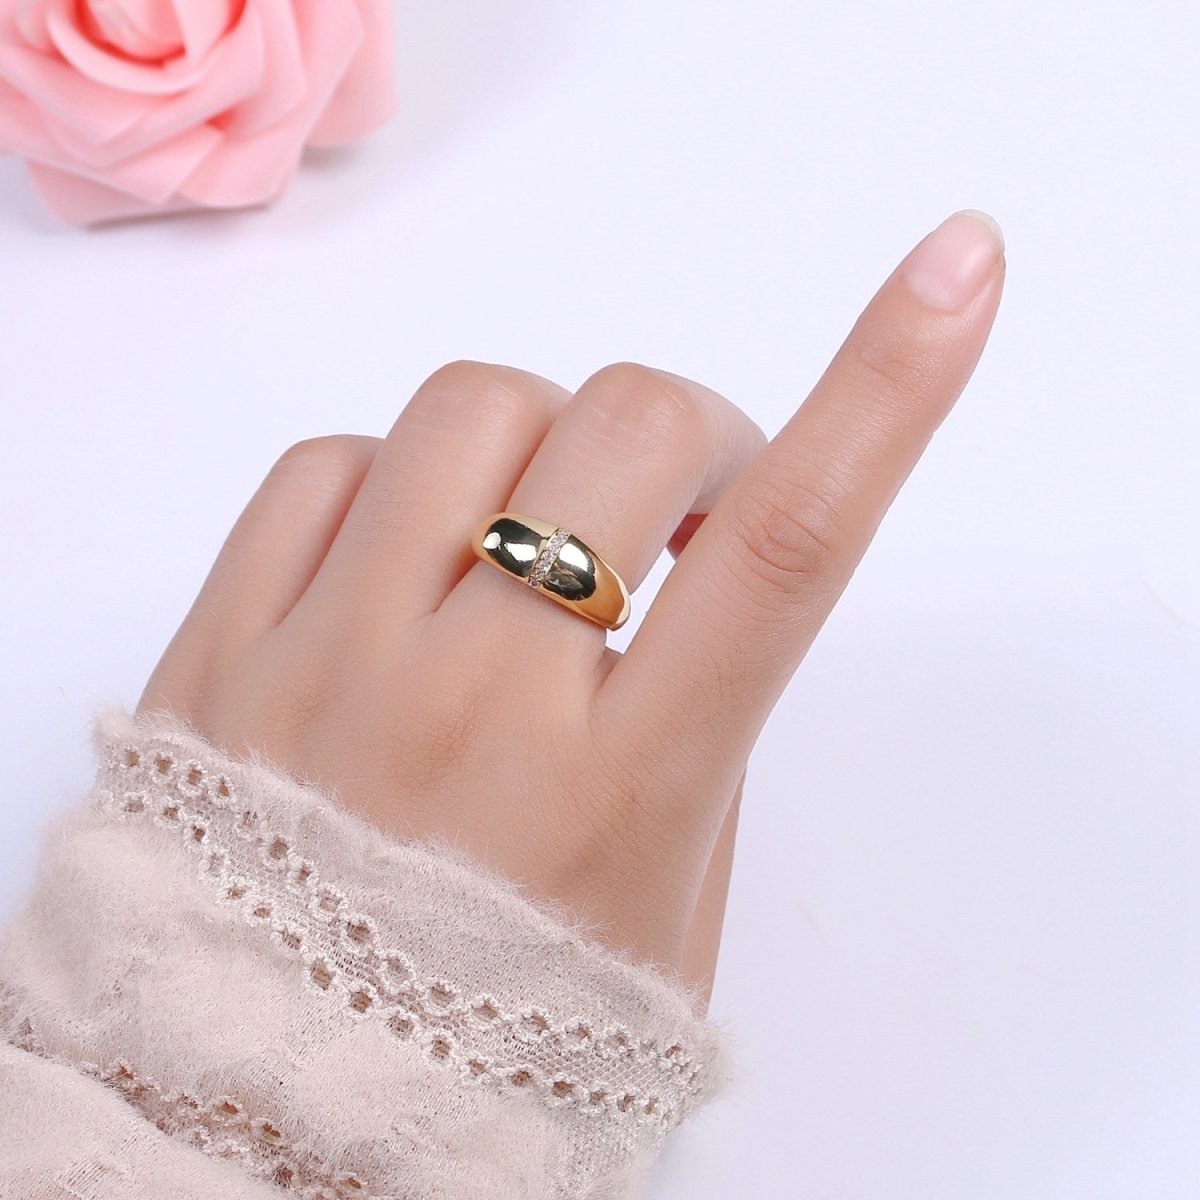 Bold Dome Ring, Adjustable Gold Ring, Chunky Ring, Stackable Ring for Statement Jewelry Birthday Gift Idea for Her woman ring Sz 7.5 S-181 - DLUXCA